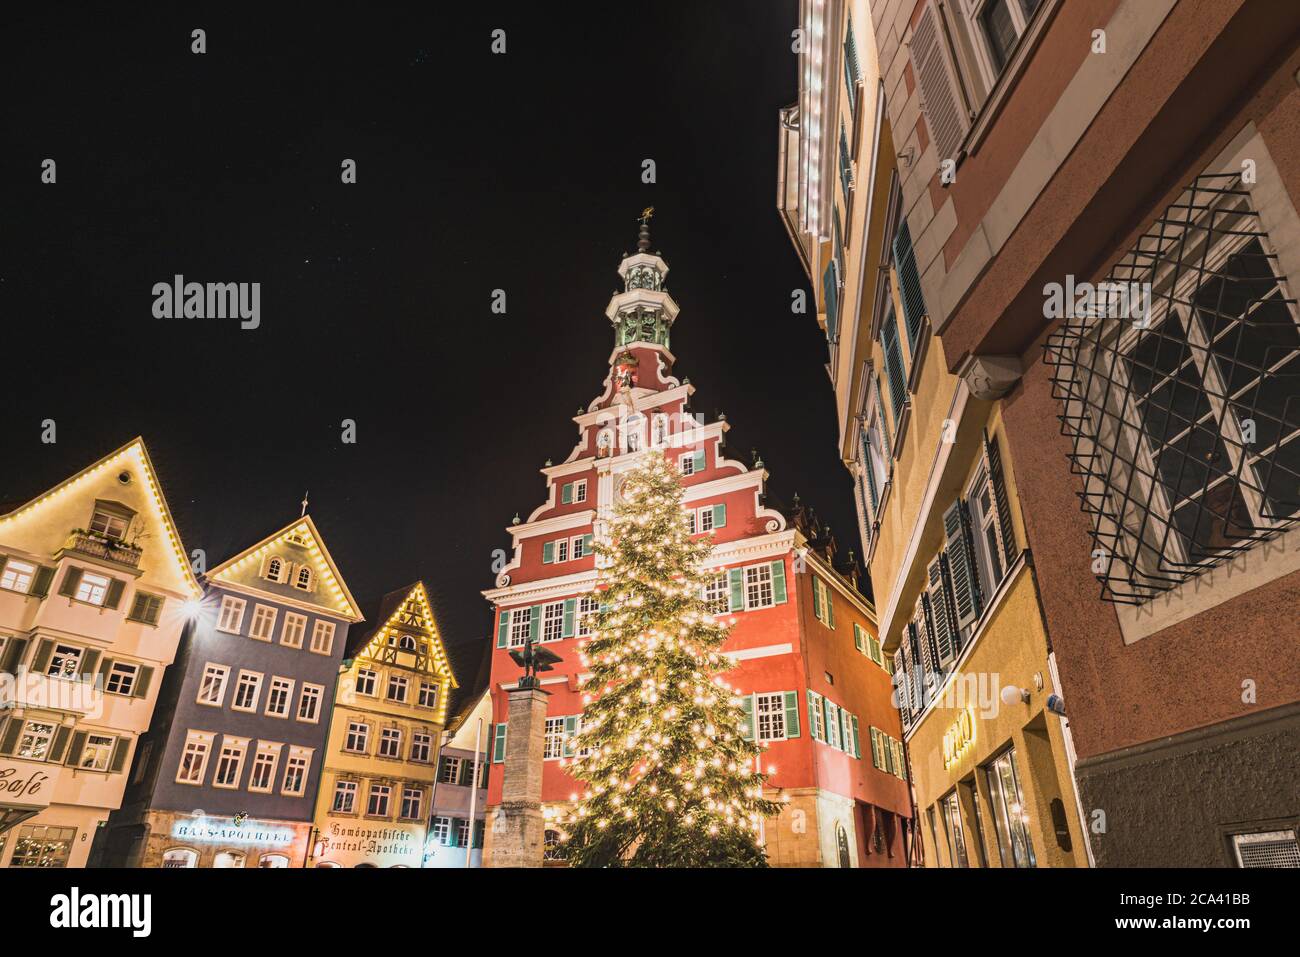 A Christmas tree stands by the Esslingen Altes Rathaus (Old Town Hall) during a clear night in the German medieval Rathausplatz (City Hall Square) Stock Photo